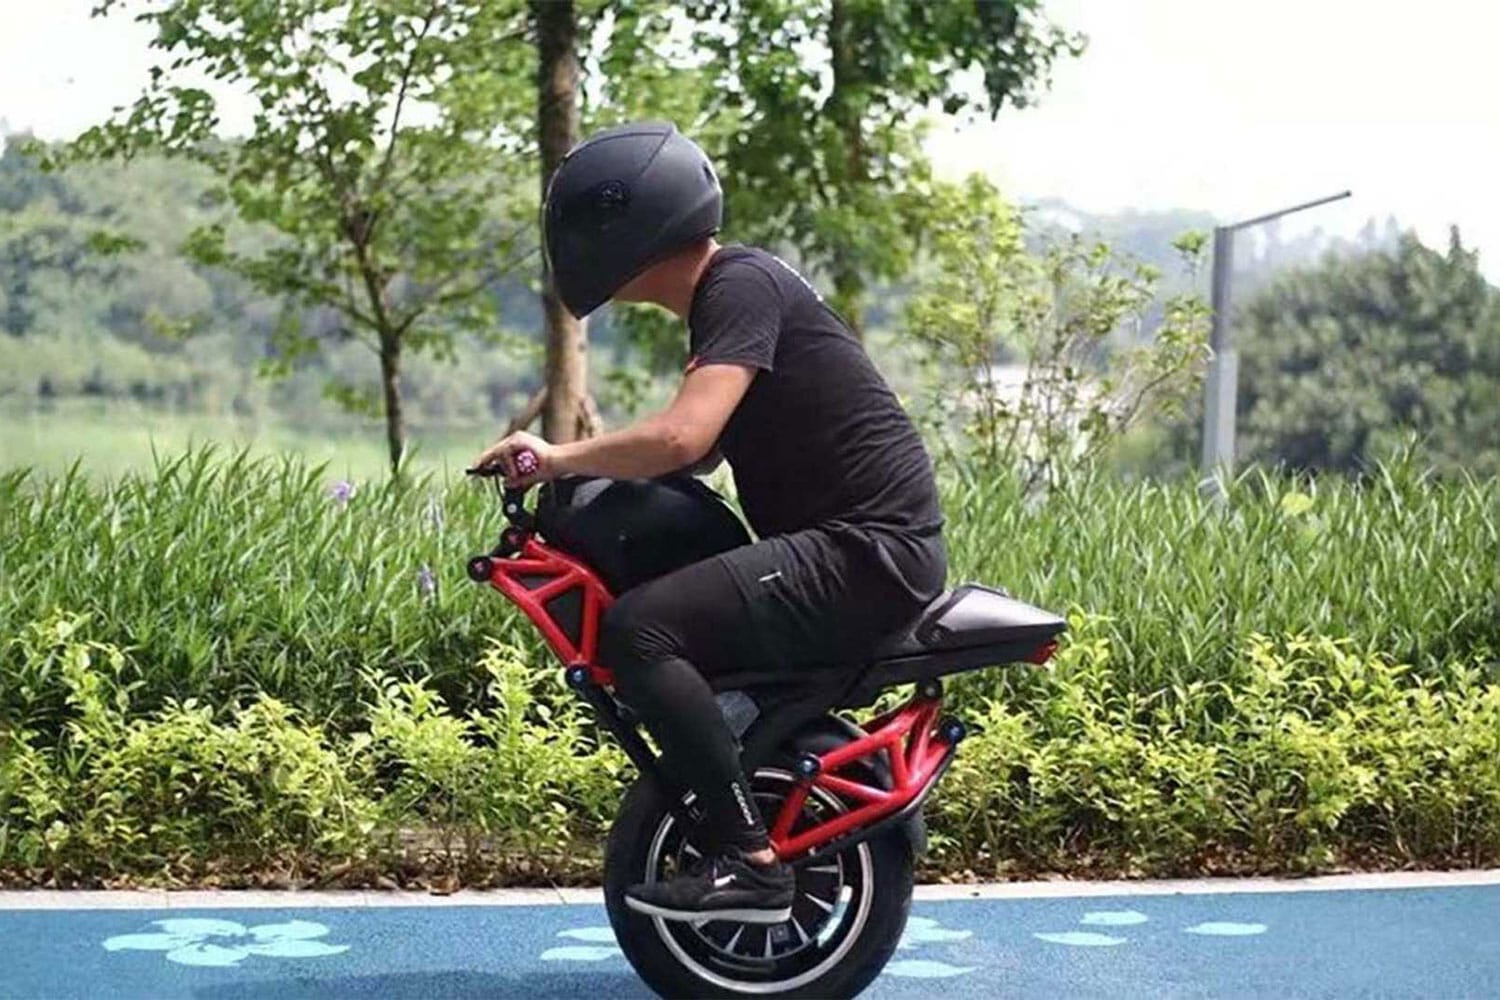 This weird one-wheeled electric motorcycle can hit a top speed of 48 km/h.